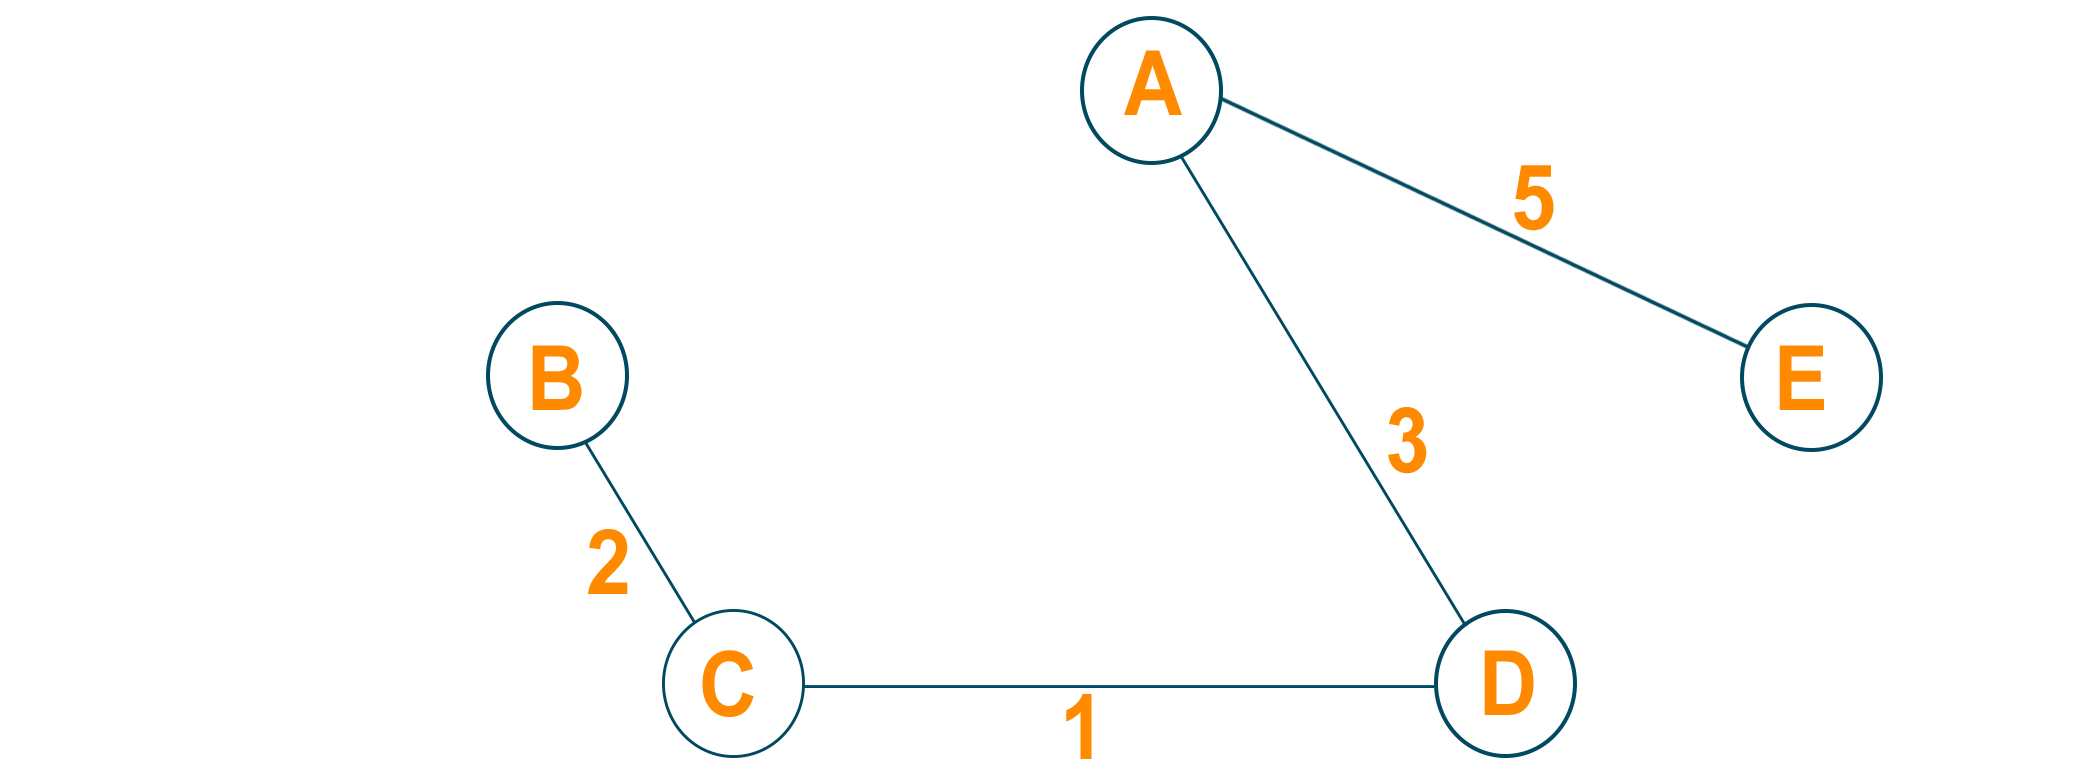 minimum spanning tree from a graph